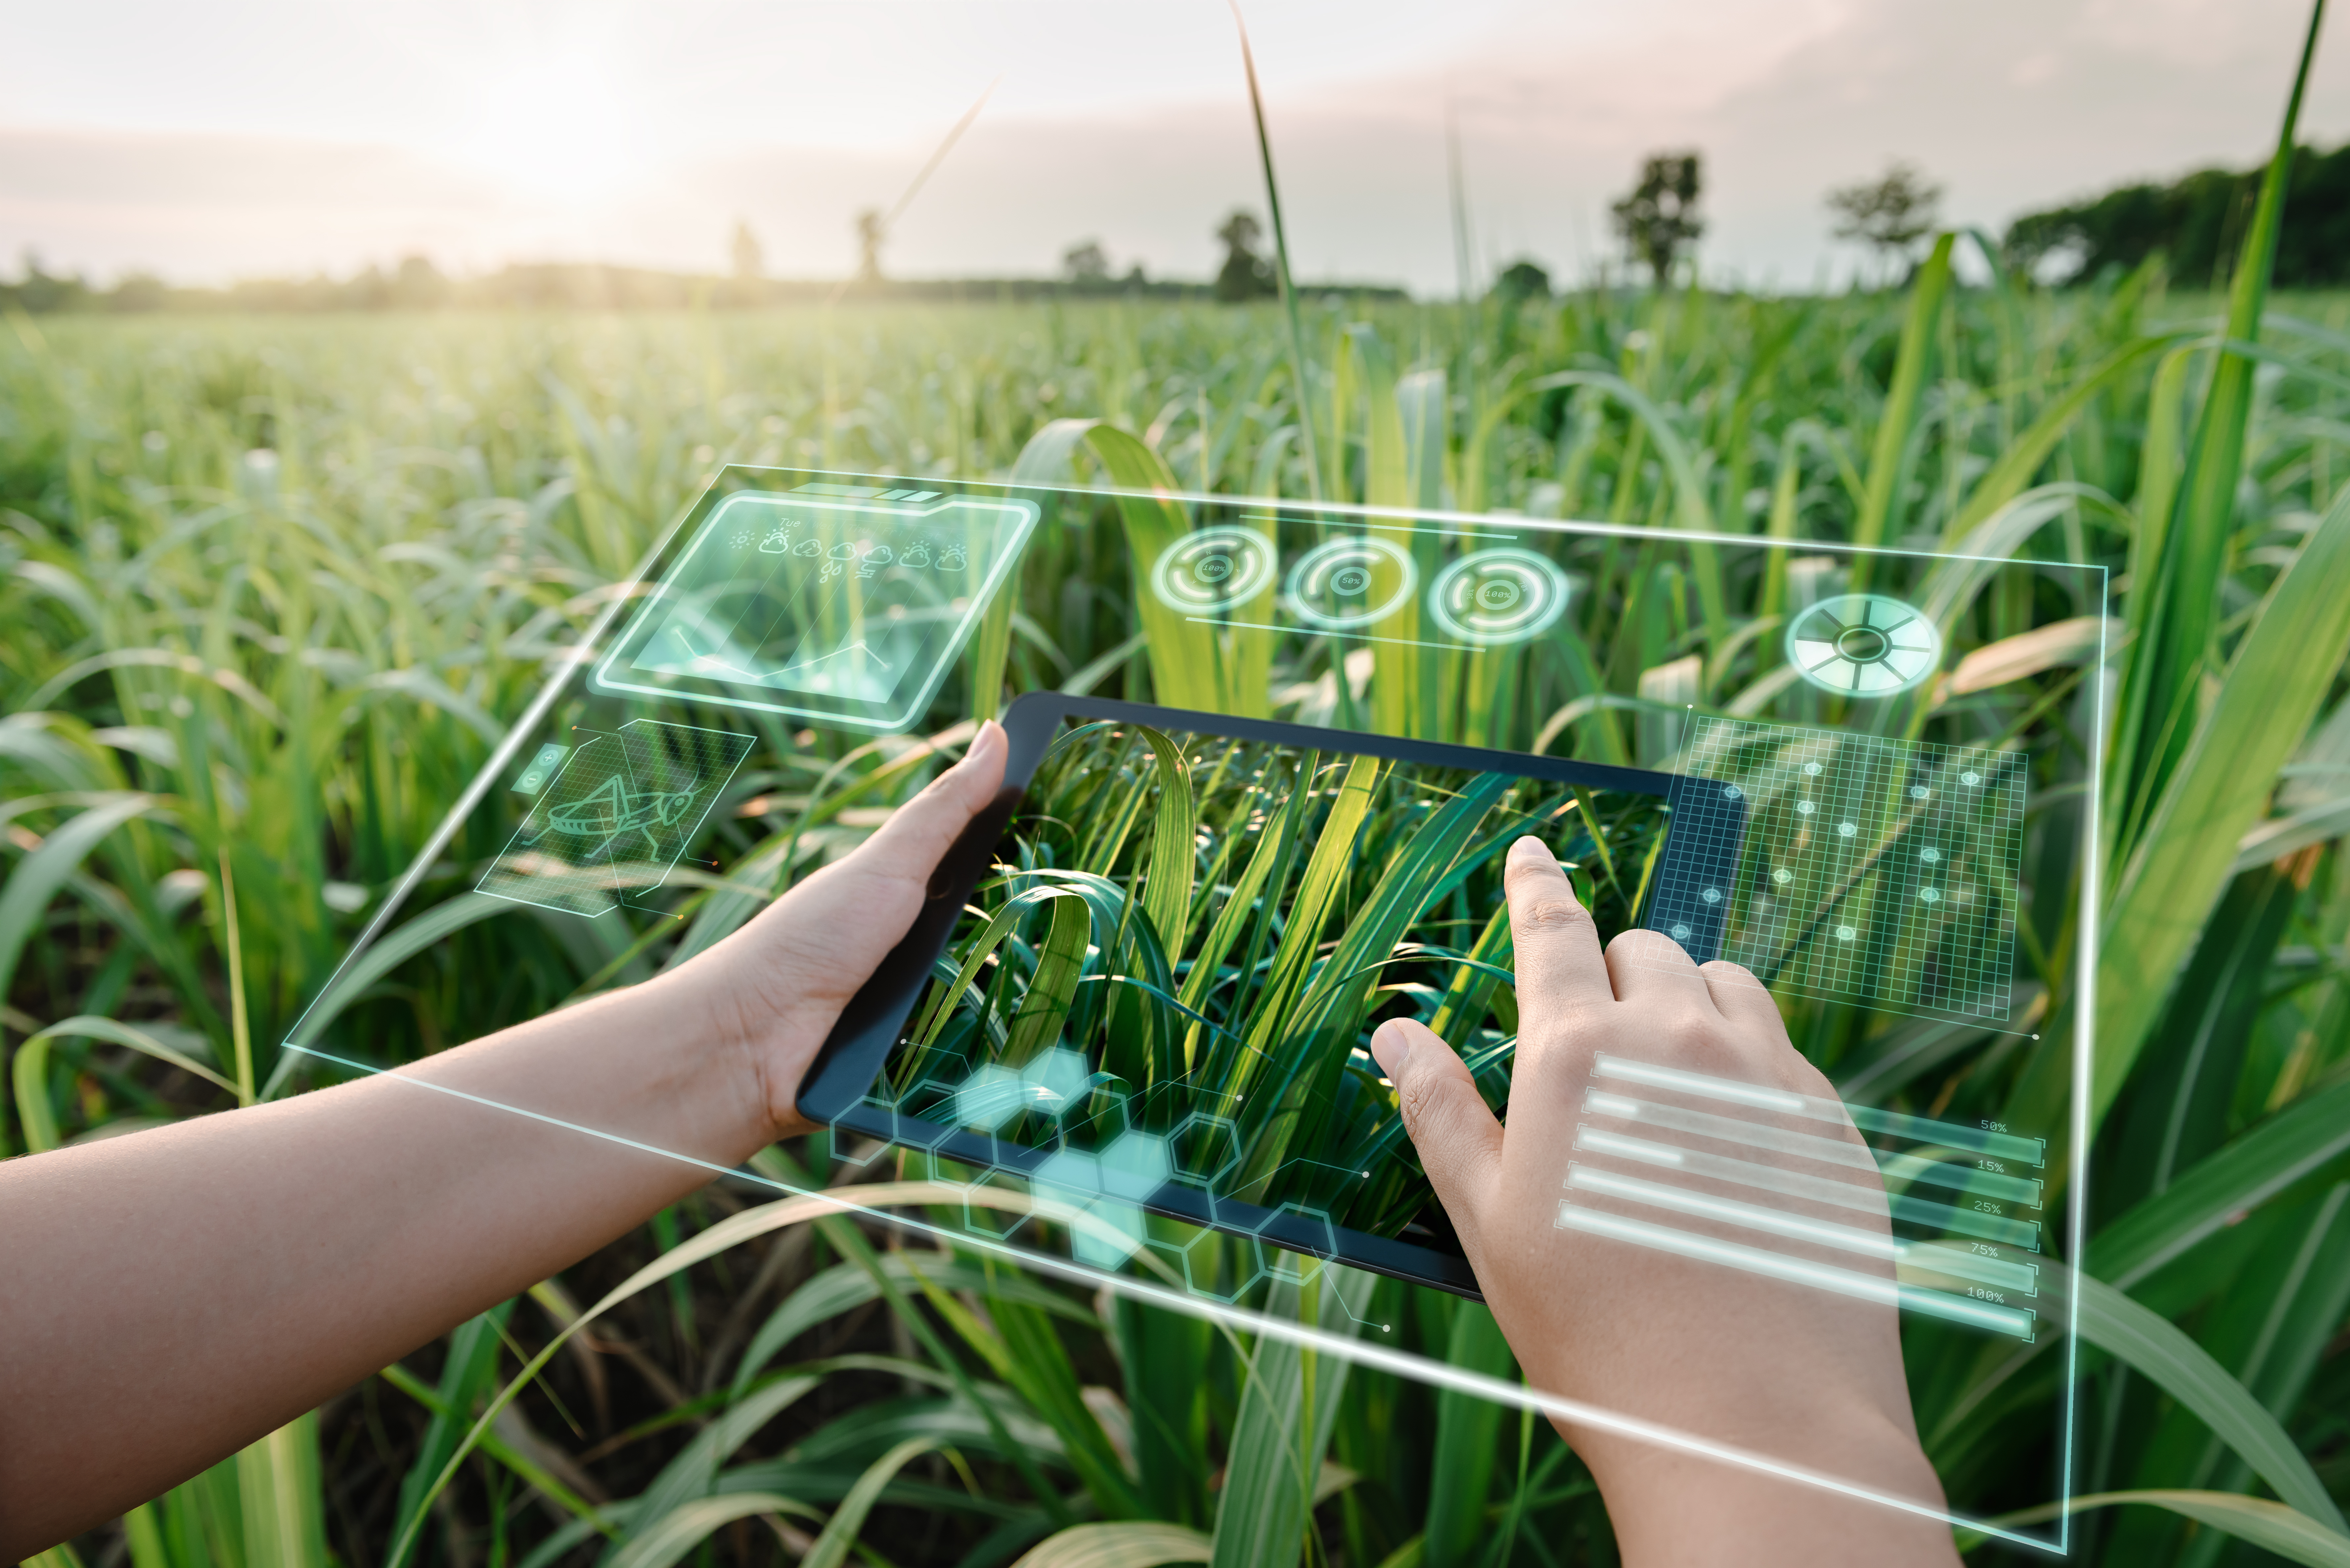 Female Farm Worker Using Digital Tablet With Virtual Reality Artificial Intelligence (AI) for Analyzing Plant Disease in Sugarcane Agriculture Fields. Technology Smart Farming and Innovation Agricultural Concepts.